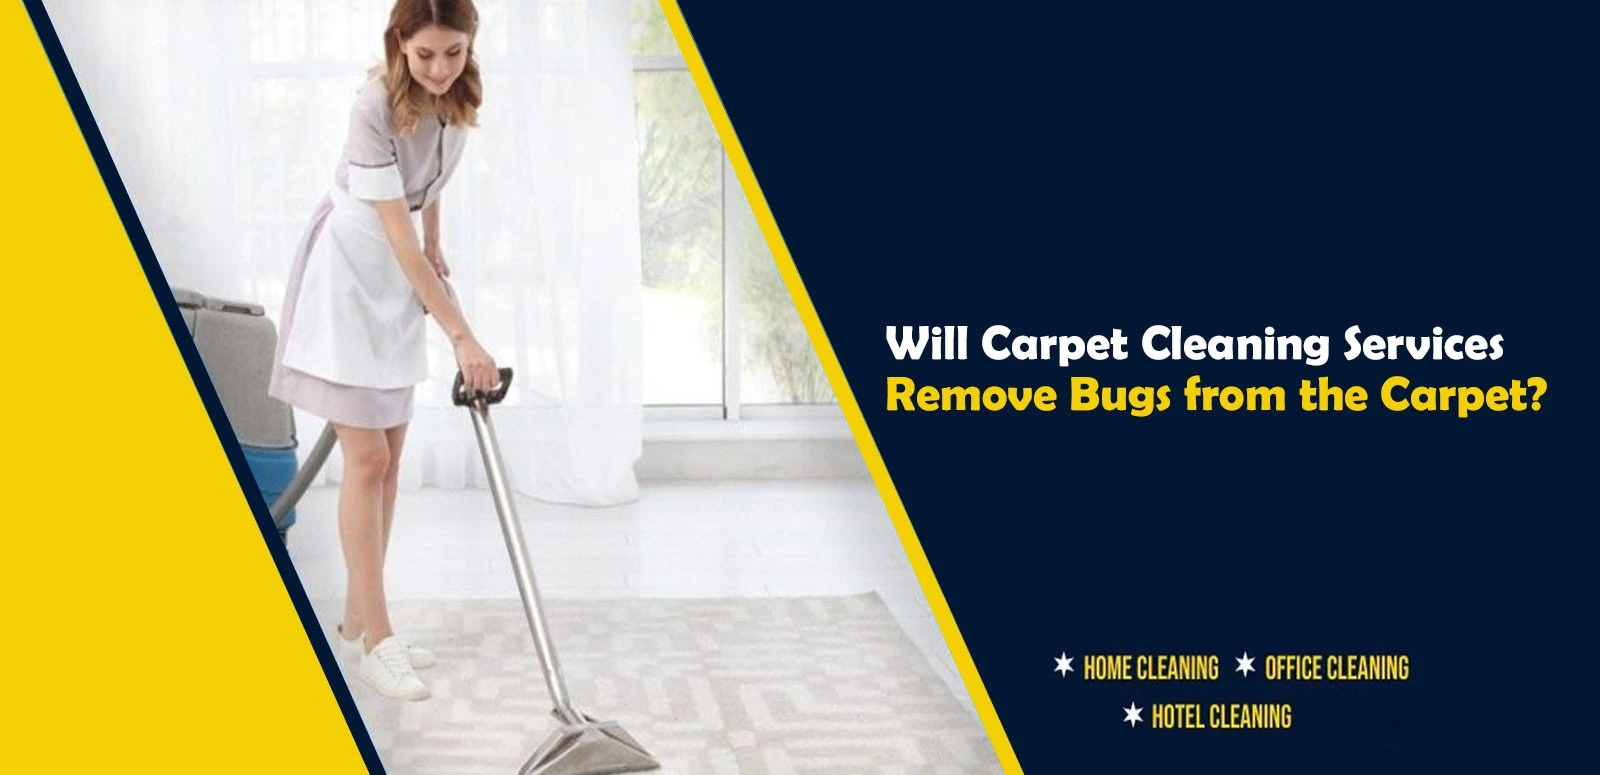 Will Carpet Cleaning Services Remove Bugs from the Carpet